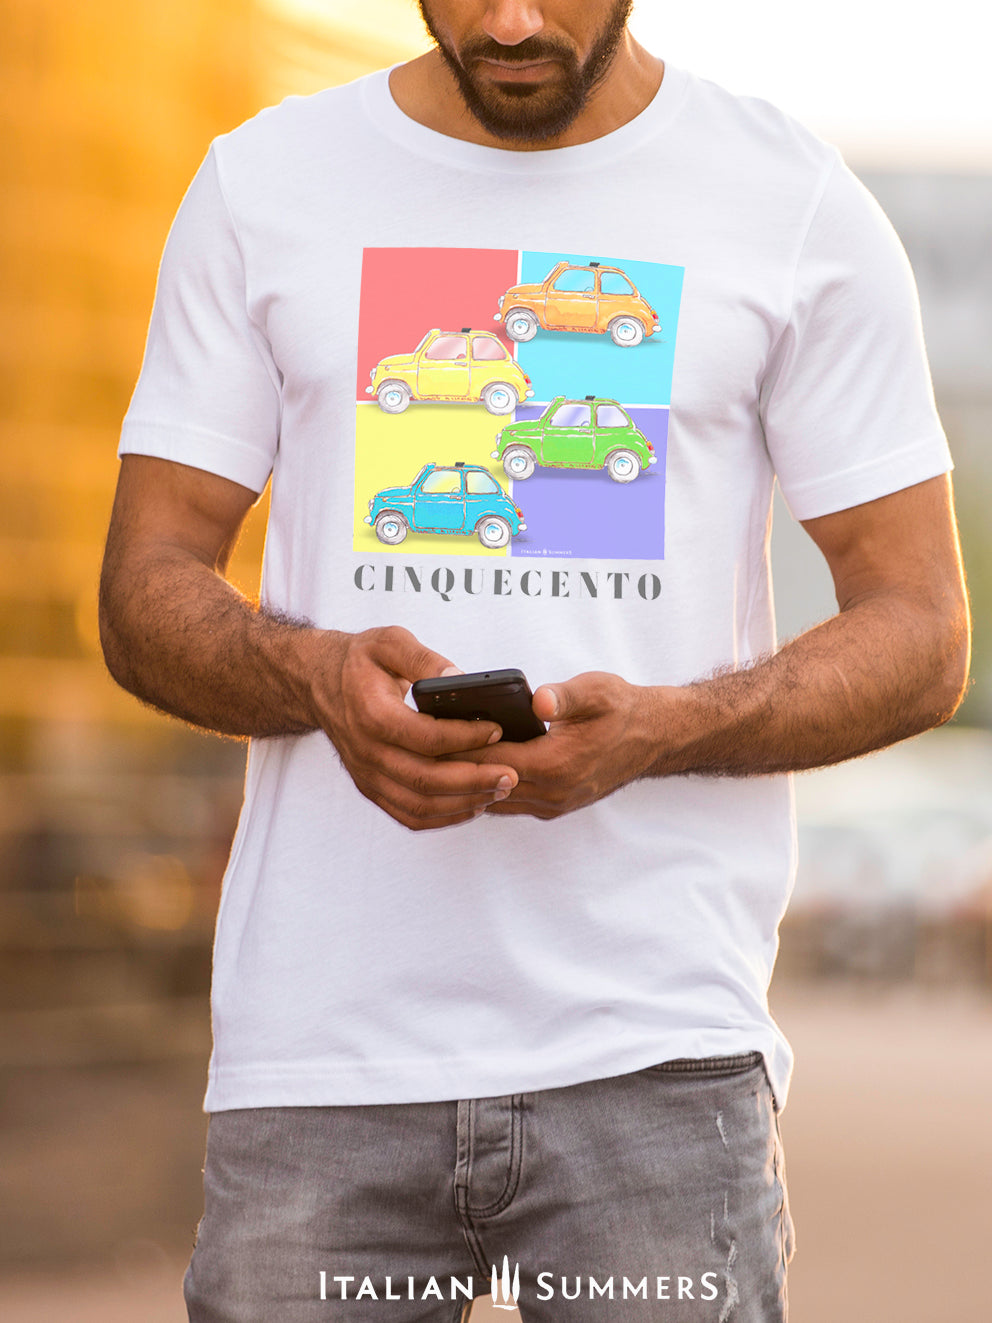 Italy white T Shirt printed with a colorful design of four vintage FIAT 500 in different vibrant colors. On the lower part of the design the title 'CINQUECENTO'  made by Italian Summers